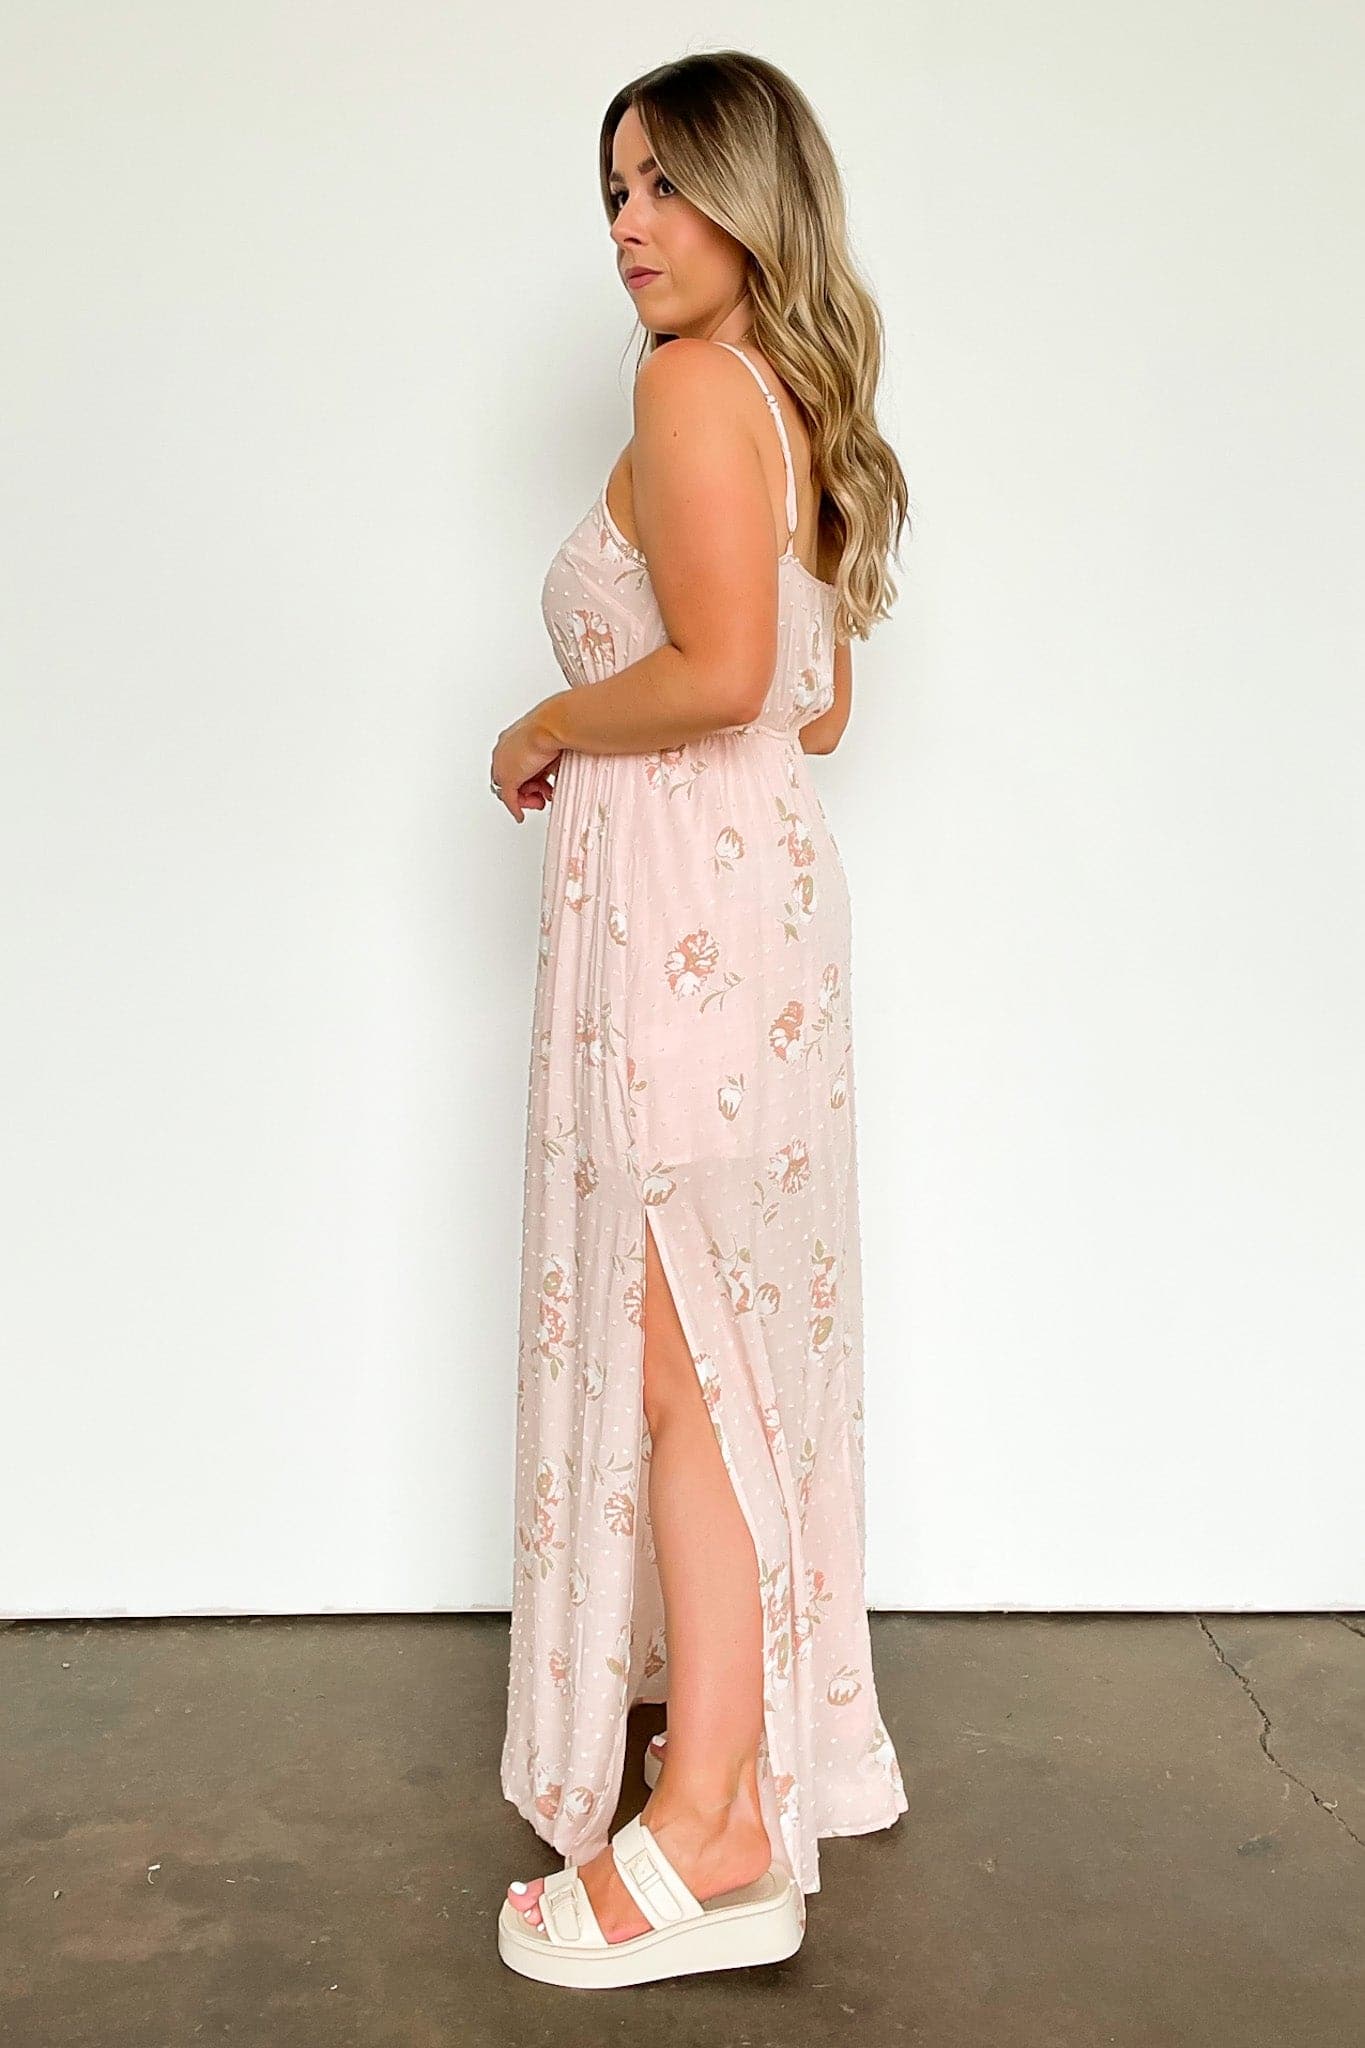  Charming Aesthetic Floral Swiss Dot Maxi Dress - FINAL SALE - Madison and Mallory